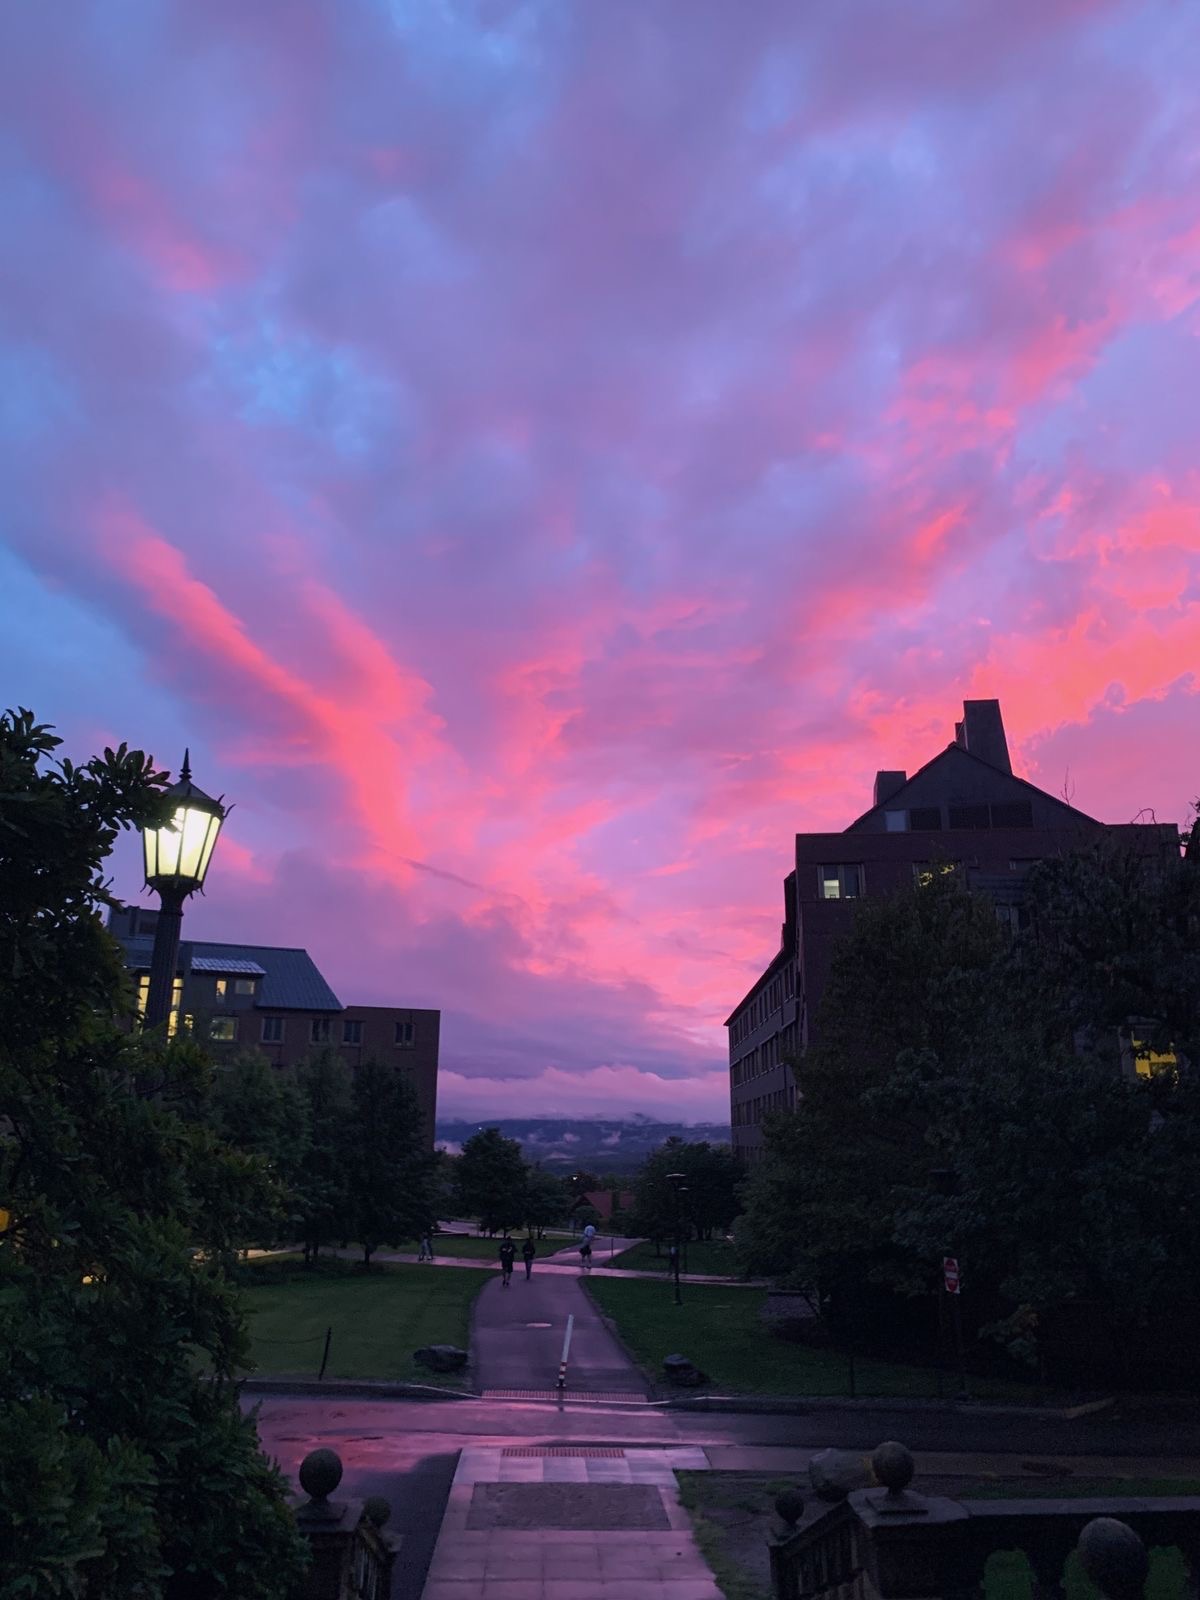 A cloudy gray and pink sunset at Cornell University.